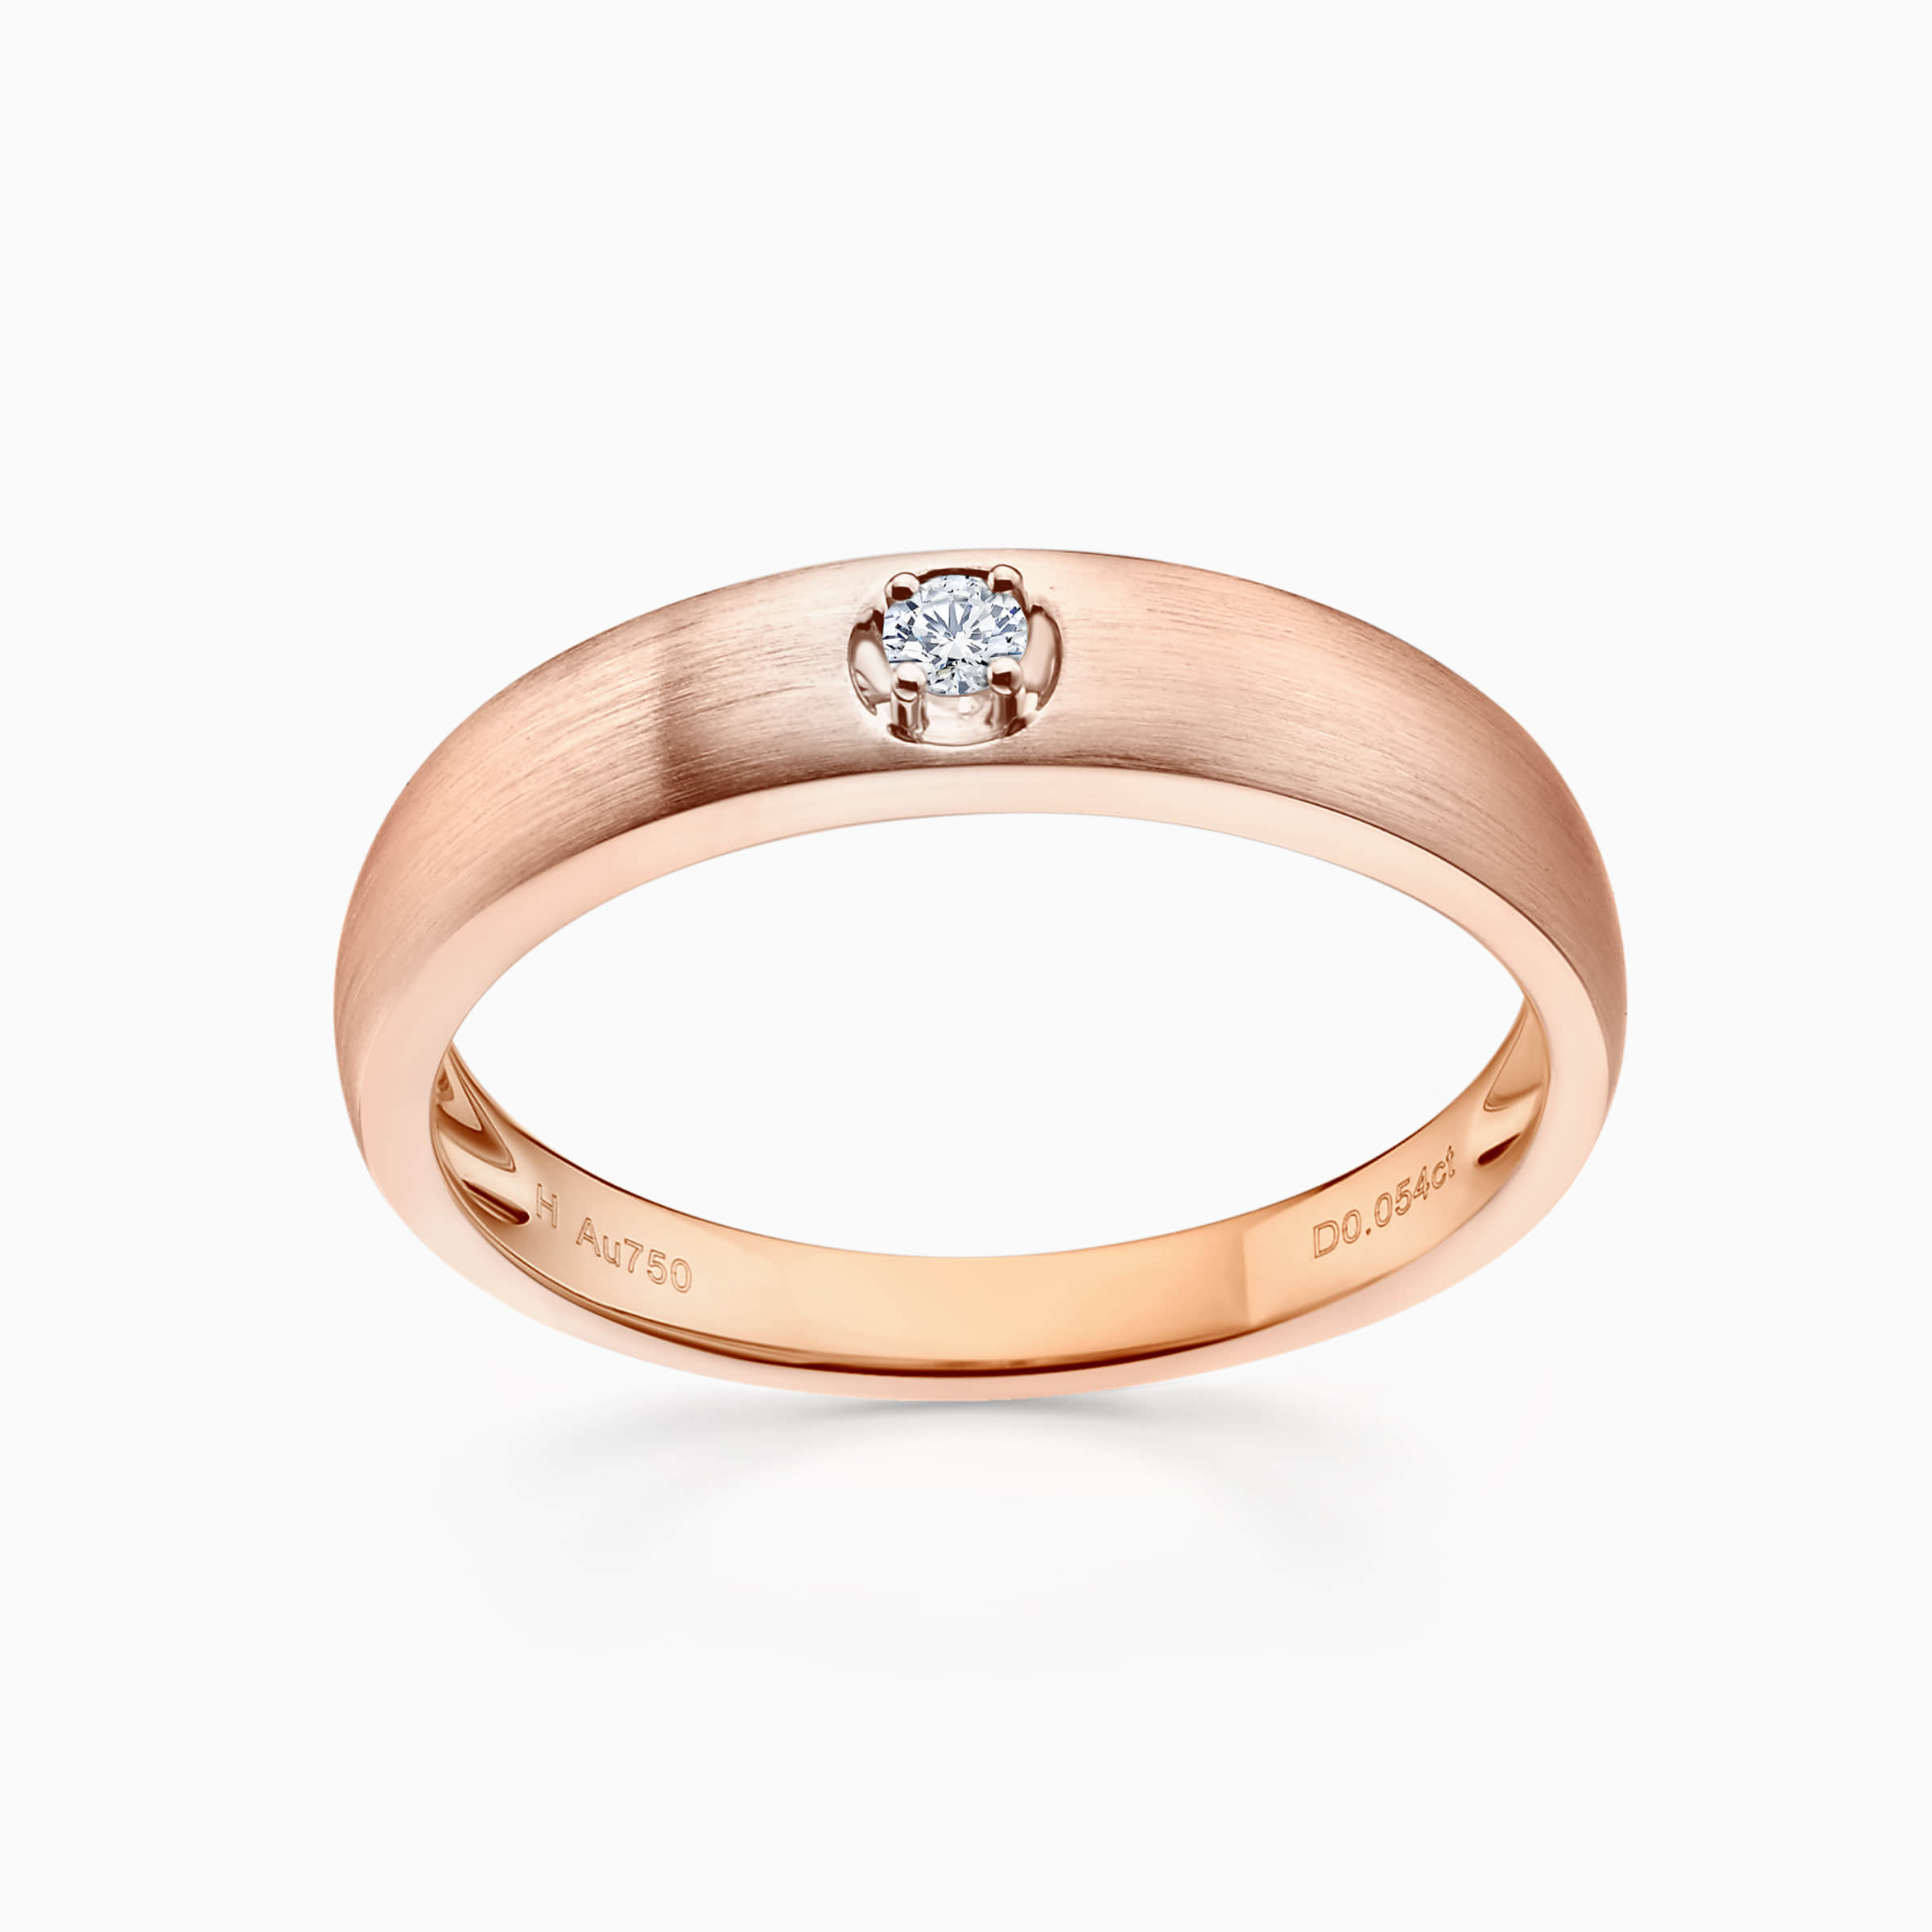 Darry Ring cool wedding ring for man in rose gold